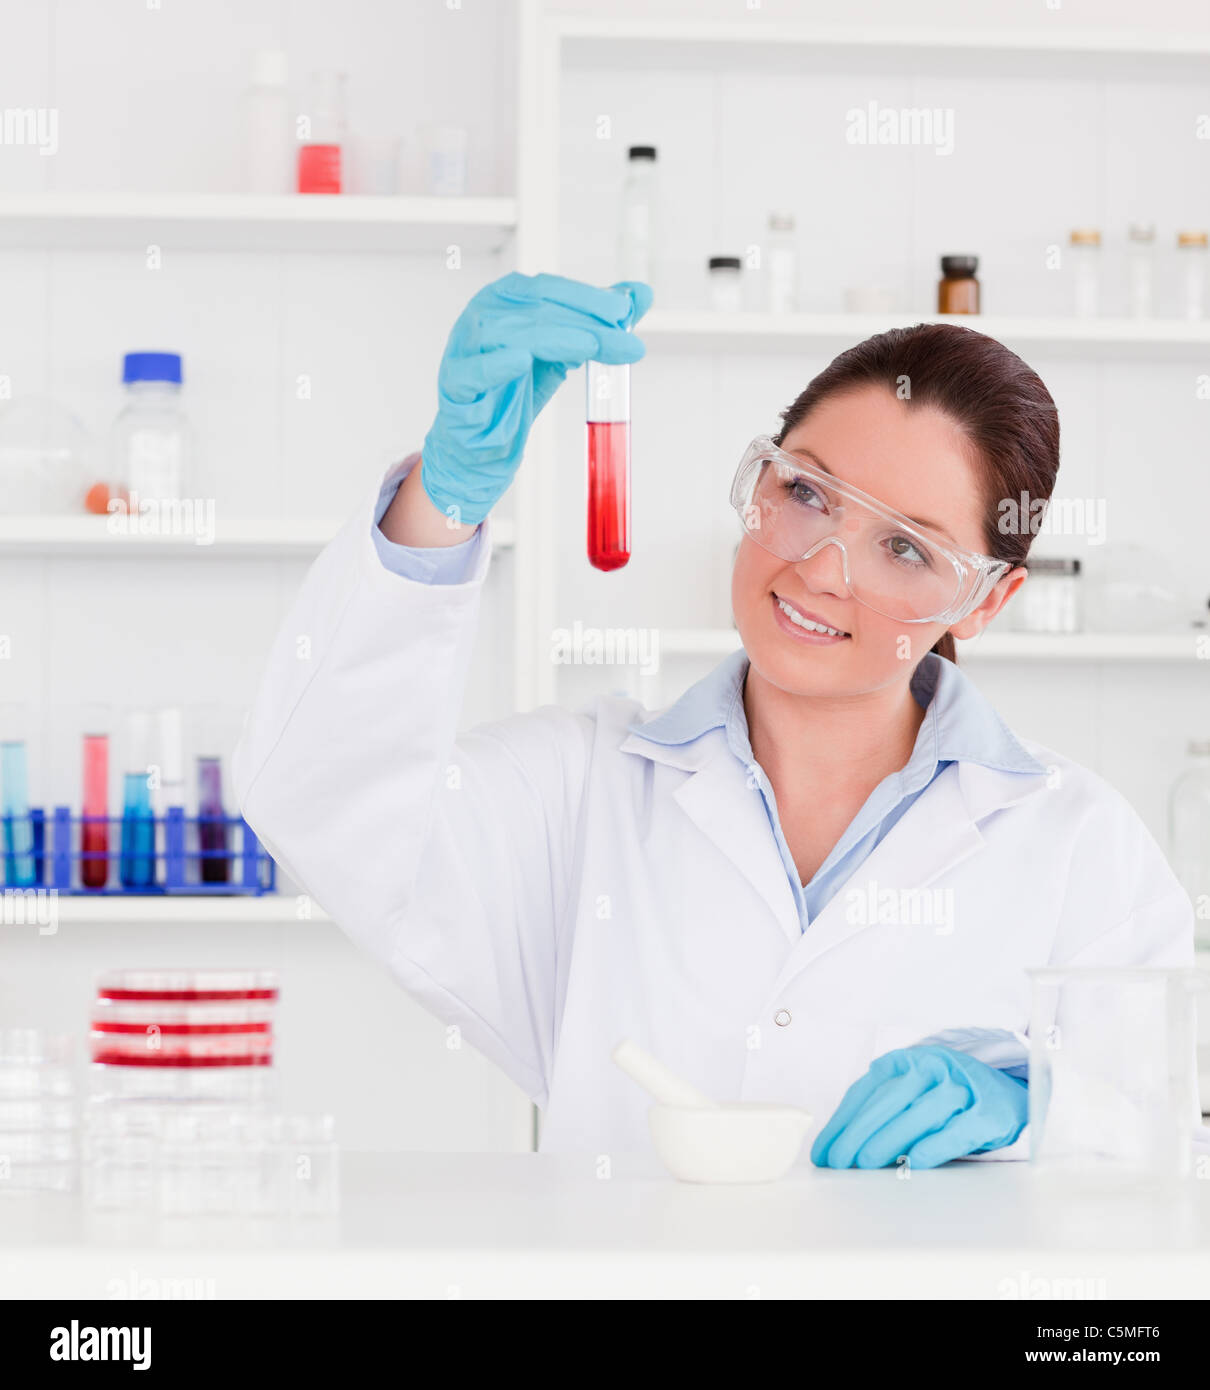 Cute scientist looking at a test tube Stock Photo